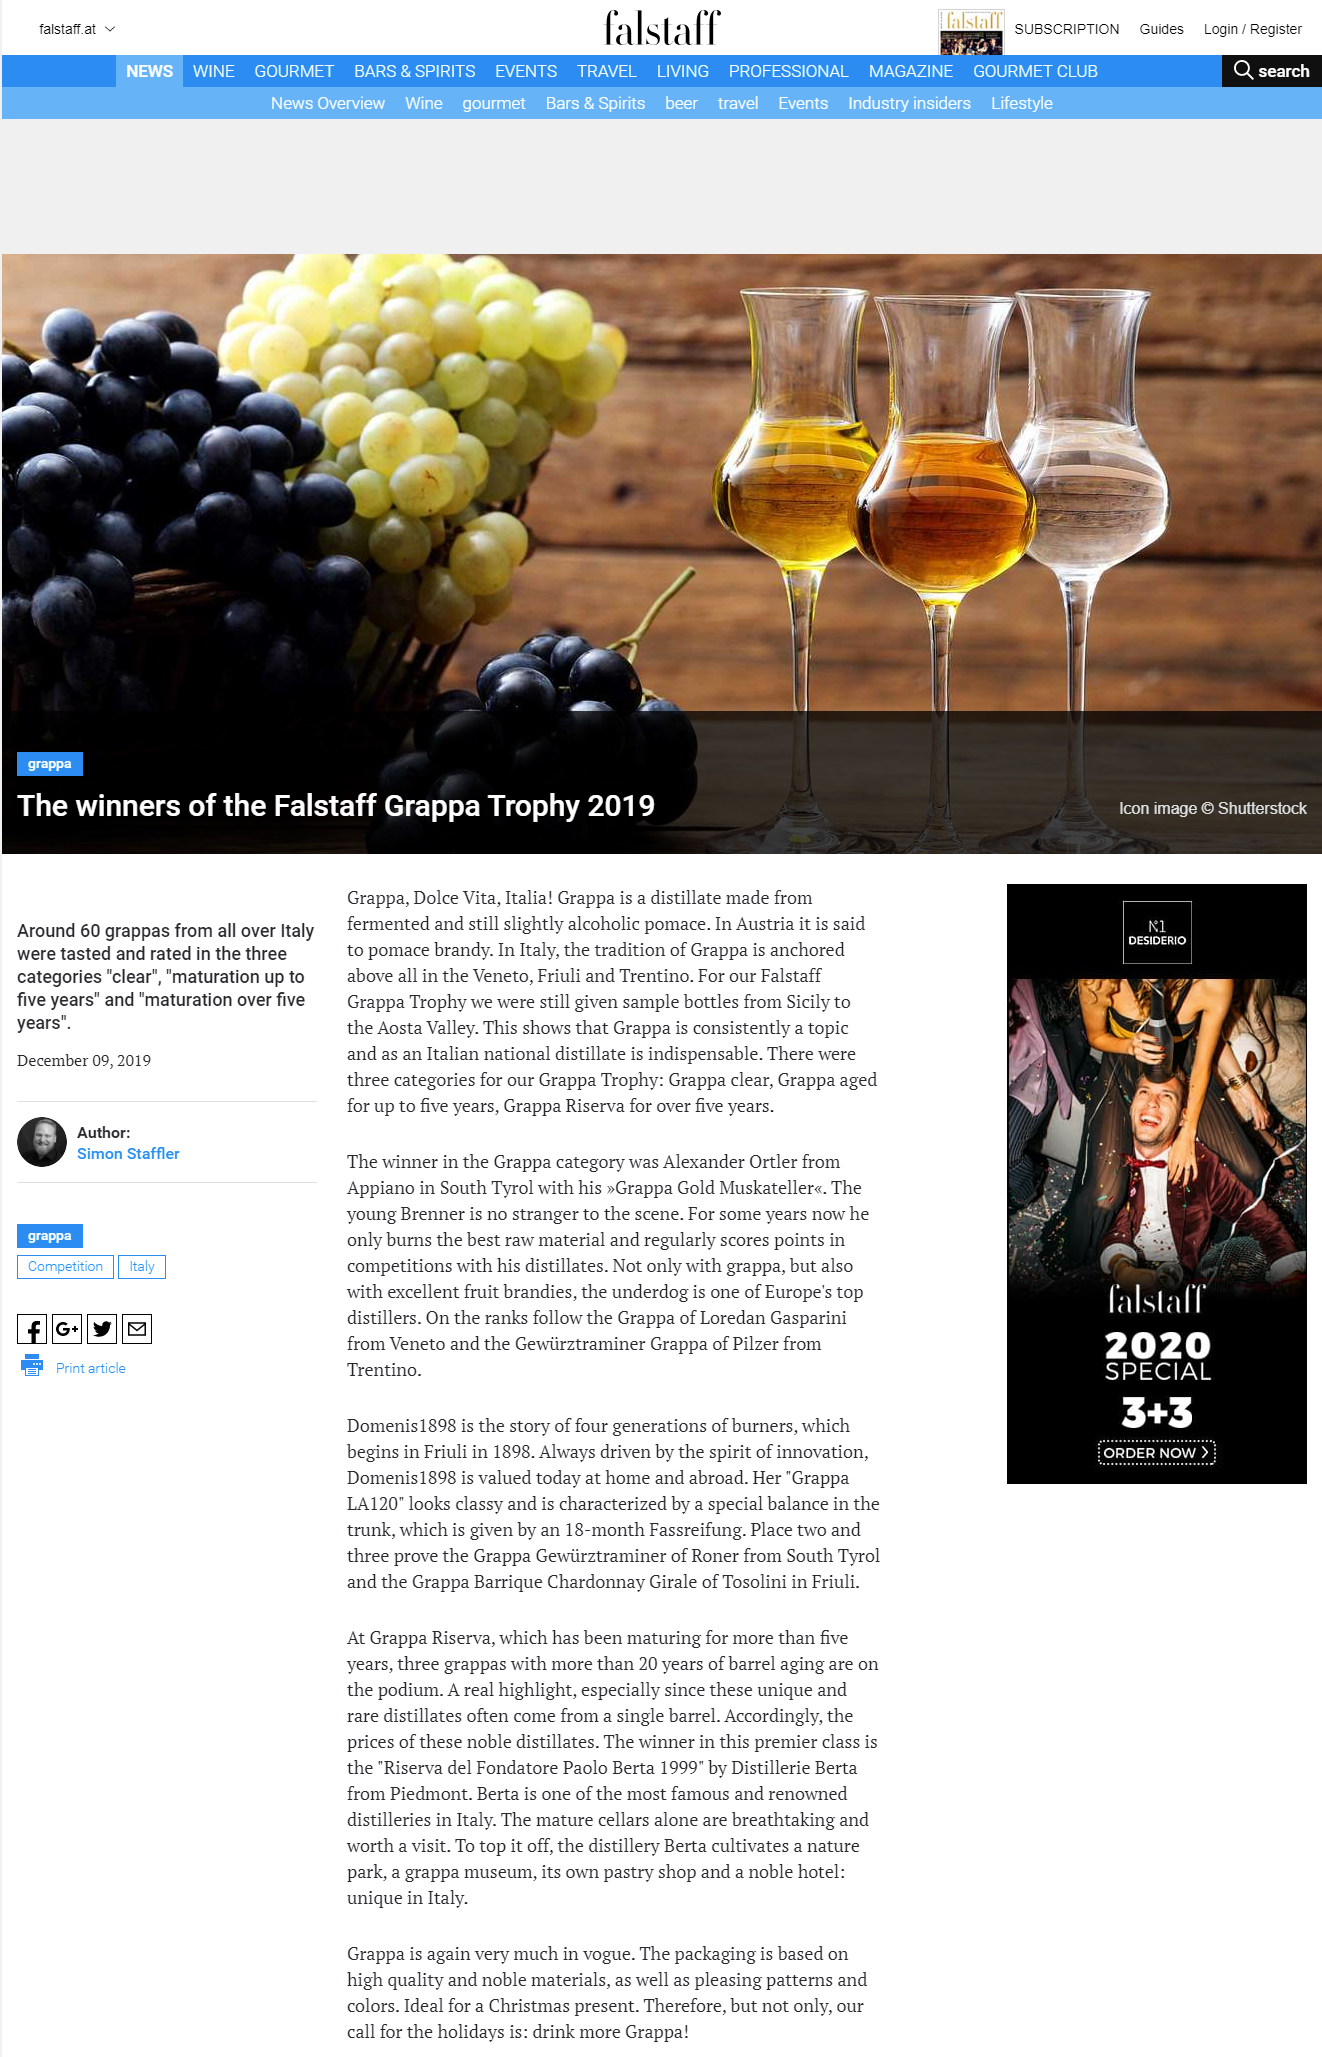 2019 dicembre 09: Falstaff.at – The winners of the Falstaff Grappa Trophy 2019